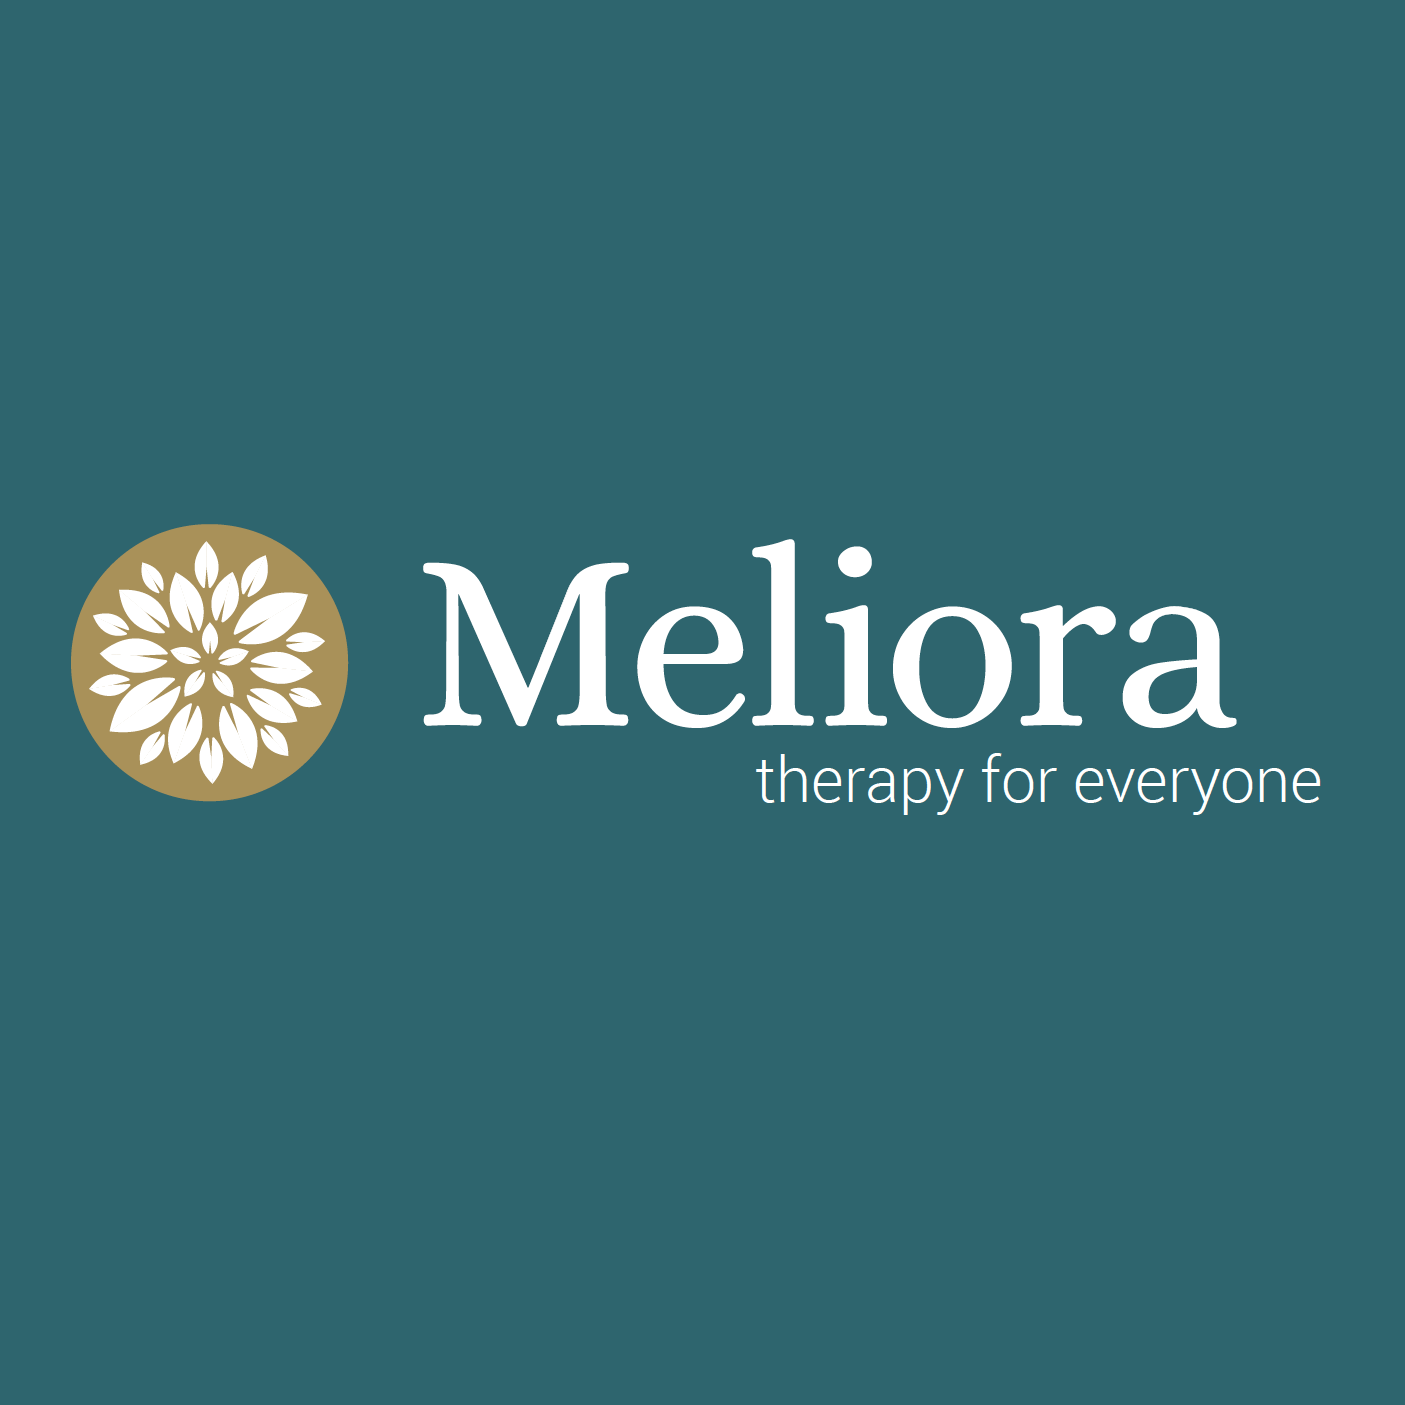 Meliora – therapy for everyone